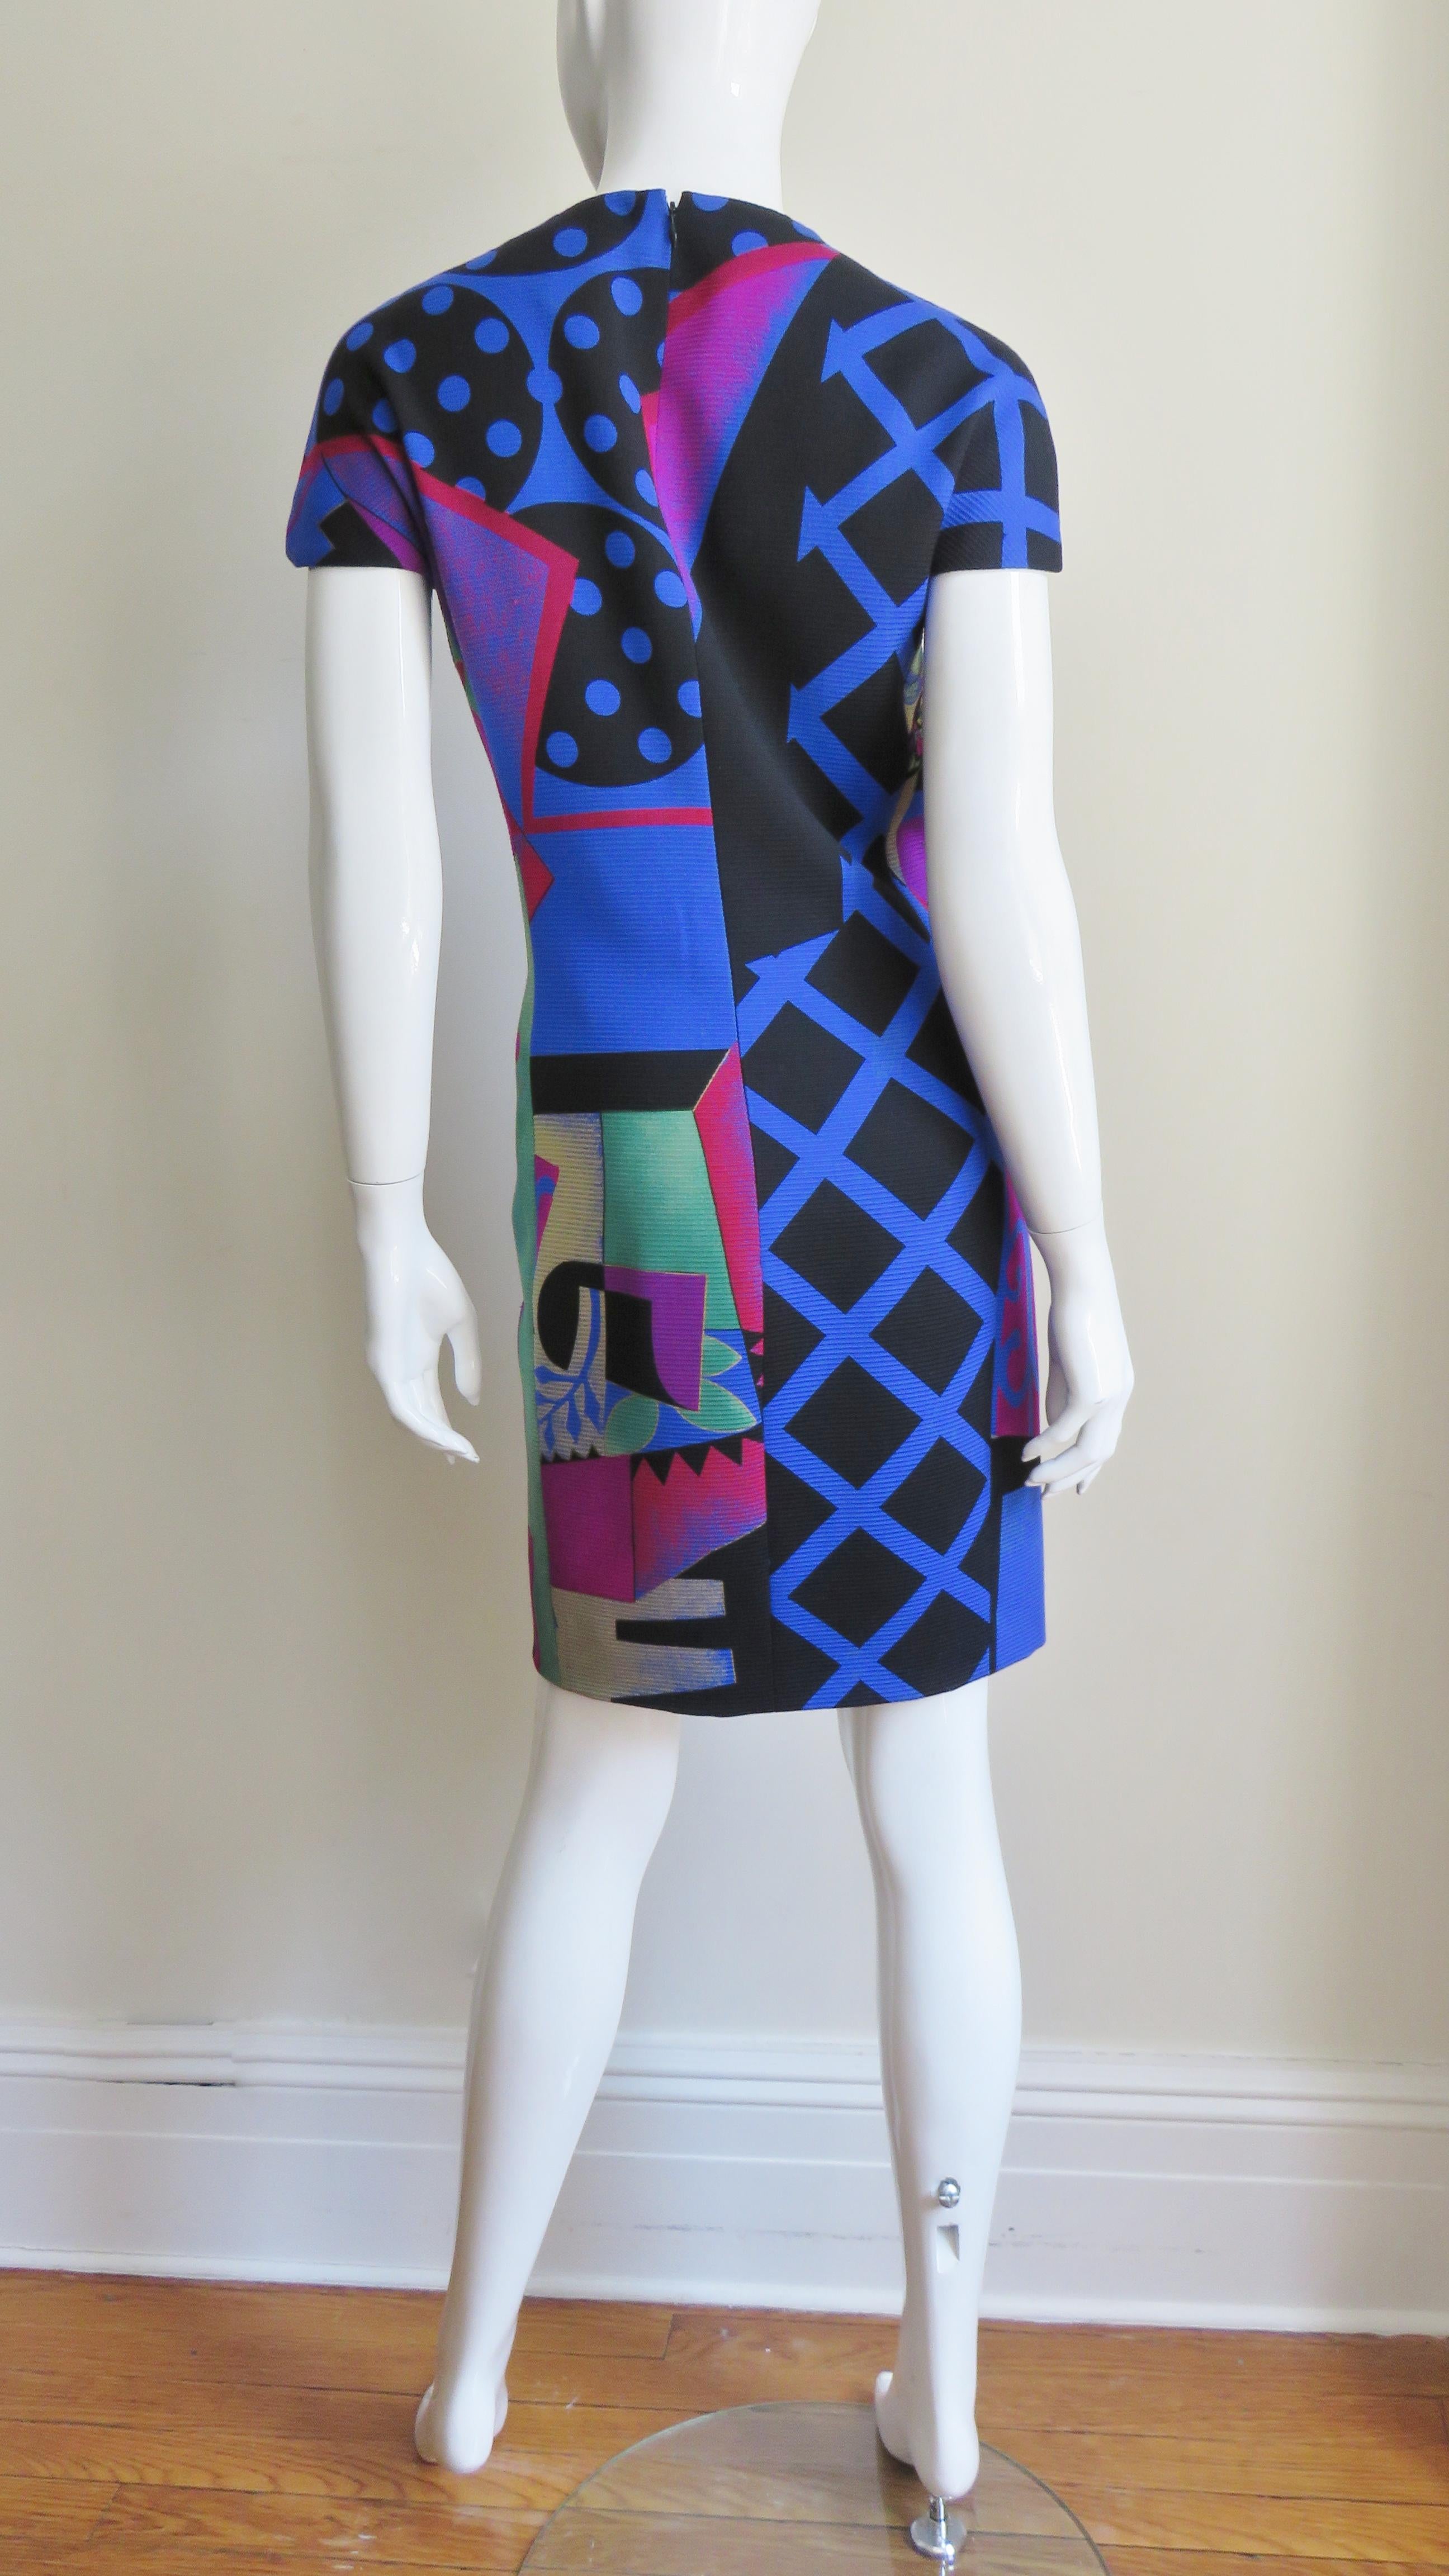 Gianni Versace Graffiti Dress and Jacket A/W 1991 For Sale 3